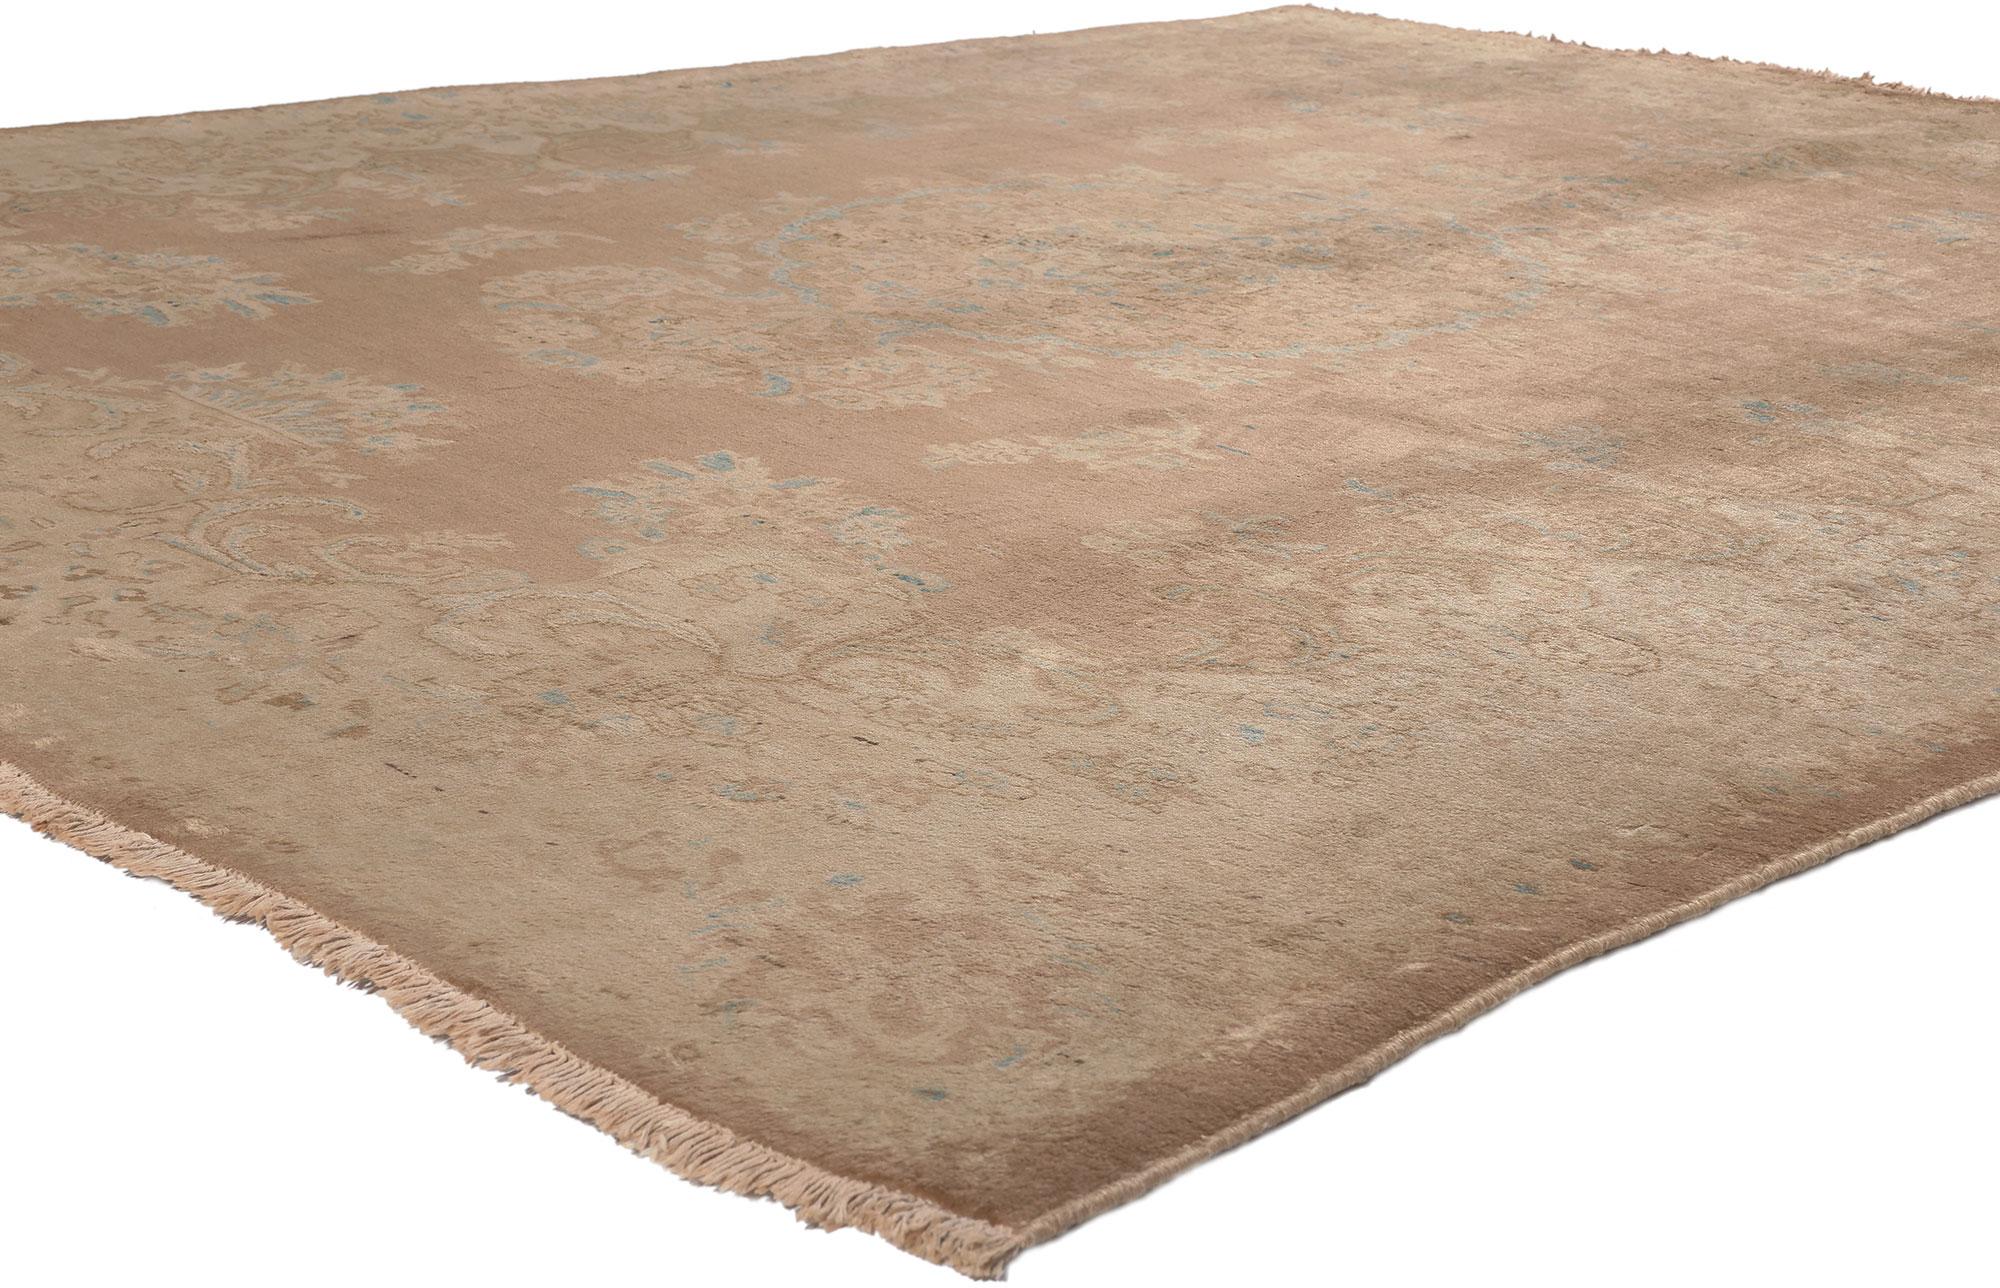 75606 Vintage Persian Sarouk Rug with Earth-Tone Colors, 07’06 x 09’02.
Earth-tone elegance meets soft and subtle in this hand knotted wool vintage Persian Sarouk rug. The floral design and neutral earth-tones woven into this piece work together